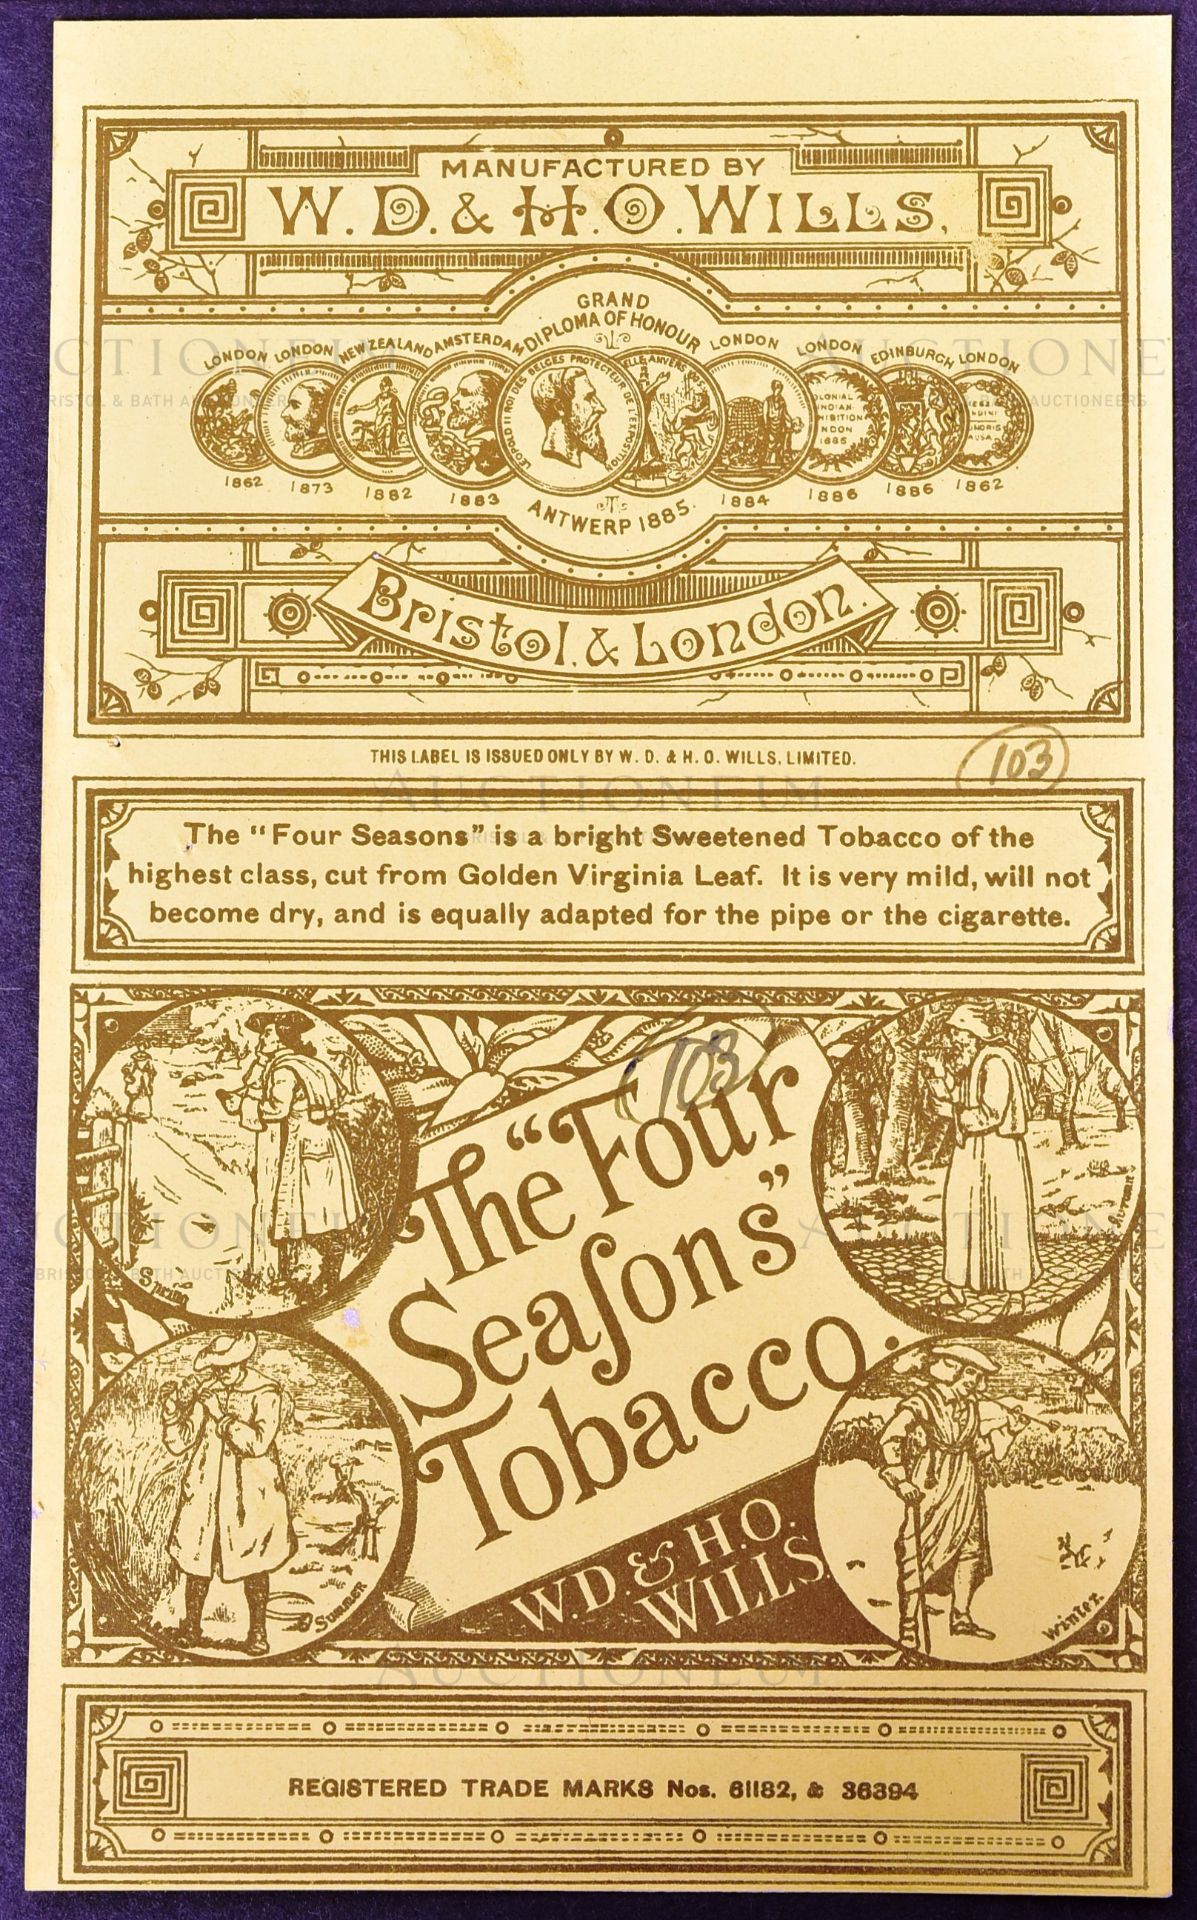 MARDON, SON & HALL - EARLY 20TH CENTURY CIGARETTE PACKET DESIGNS - Image 2 of 7